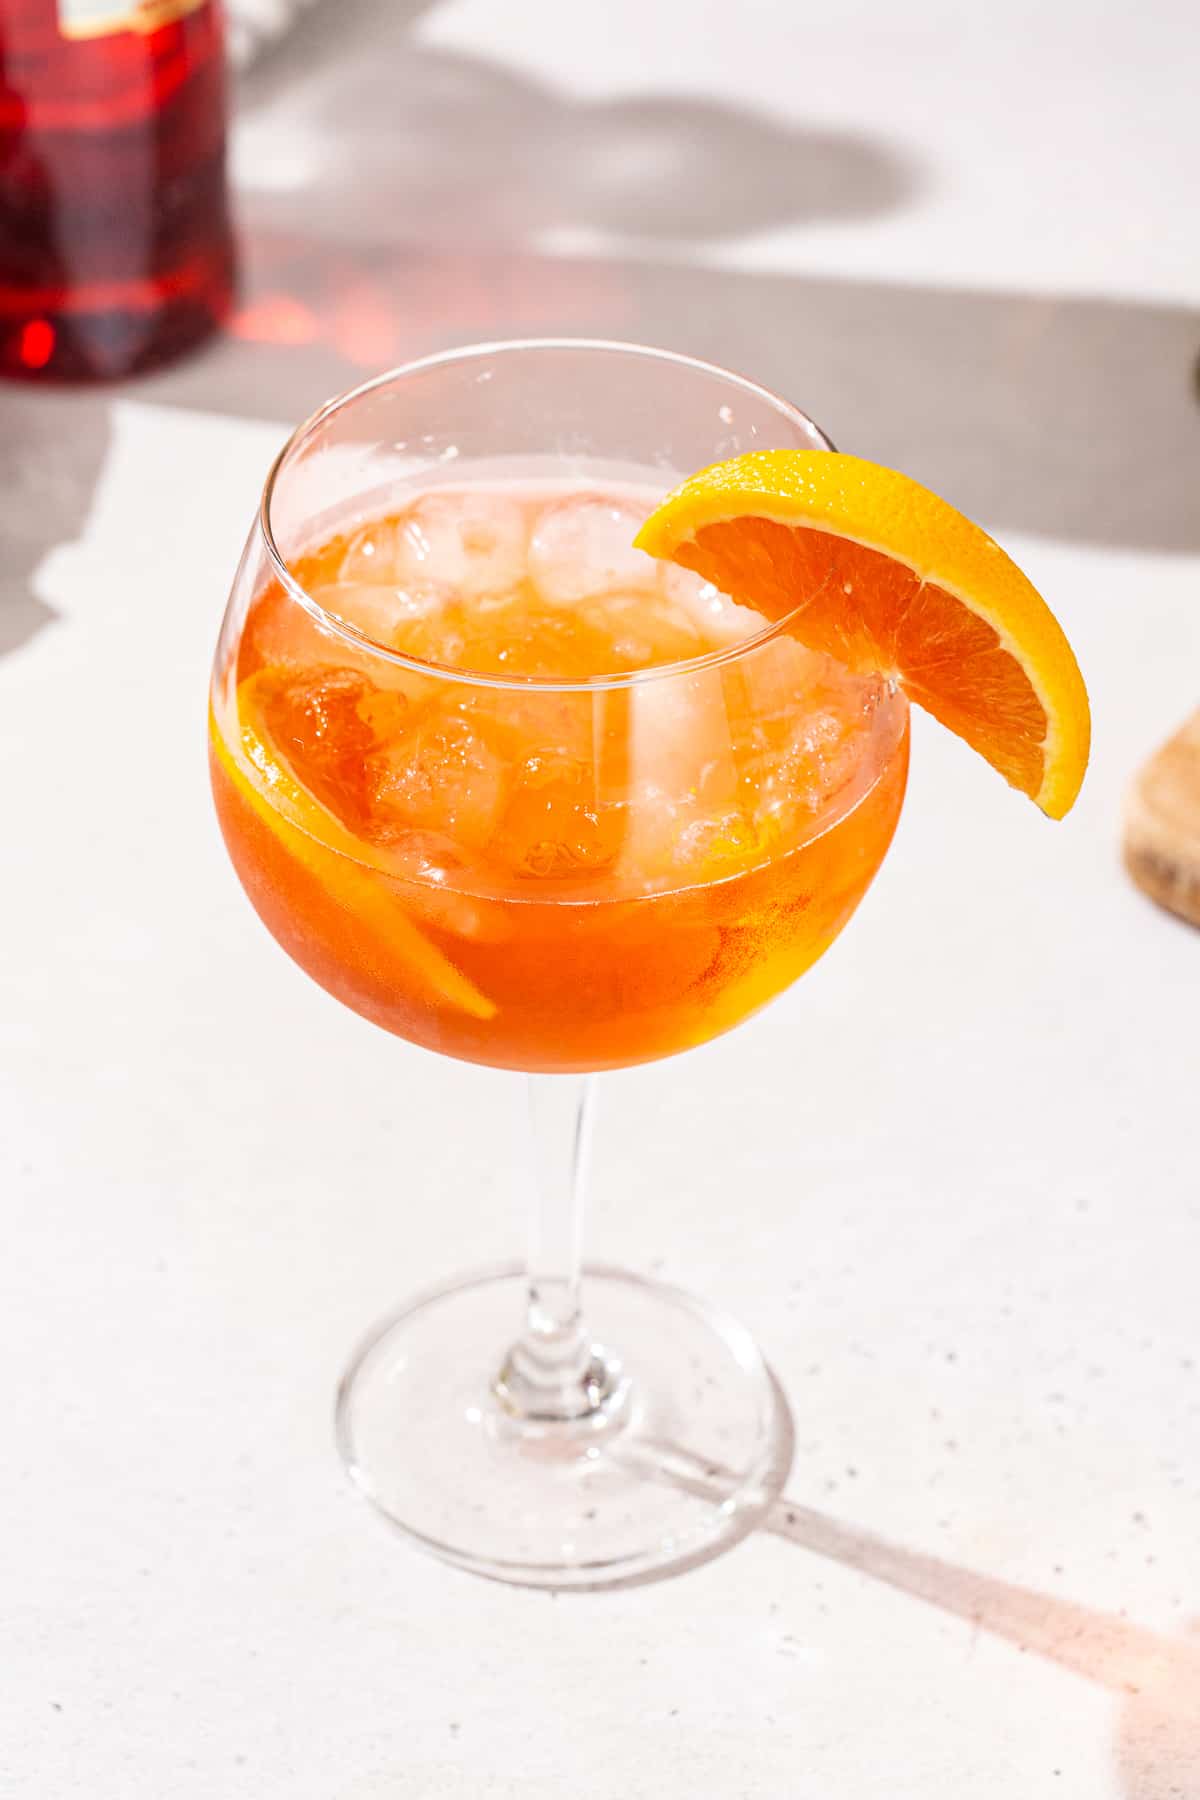 Slightly overhead view of a Negroni Spritz in a stemmed cocktail glass with orange slices as garnish.